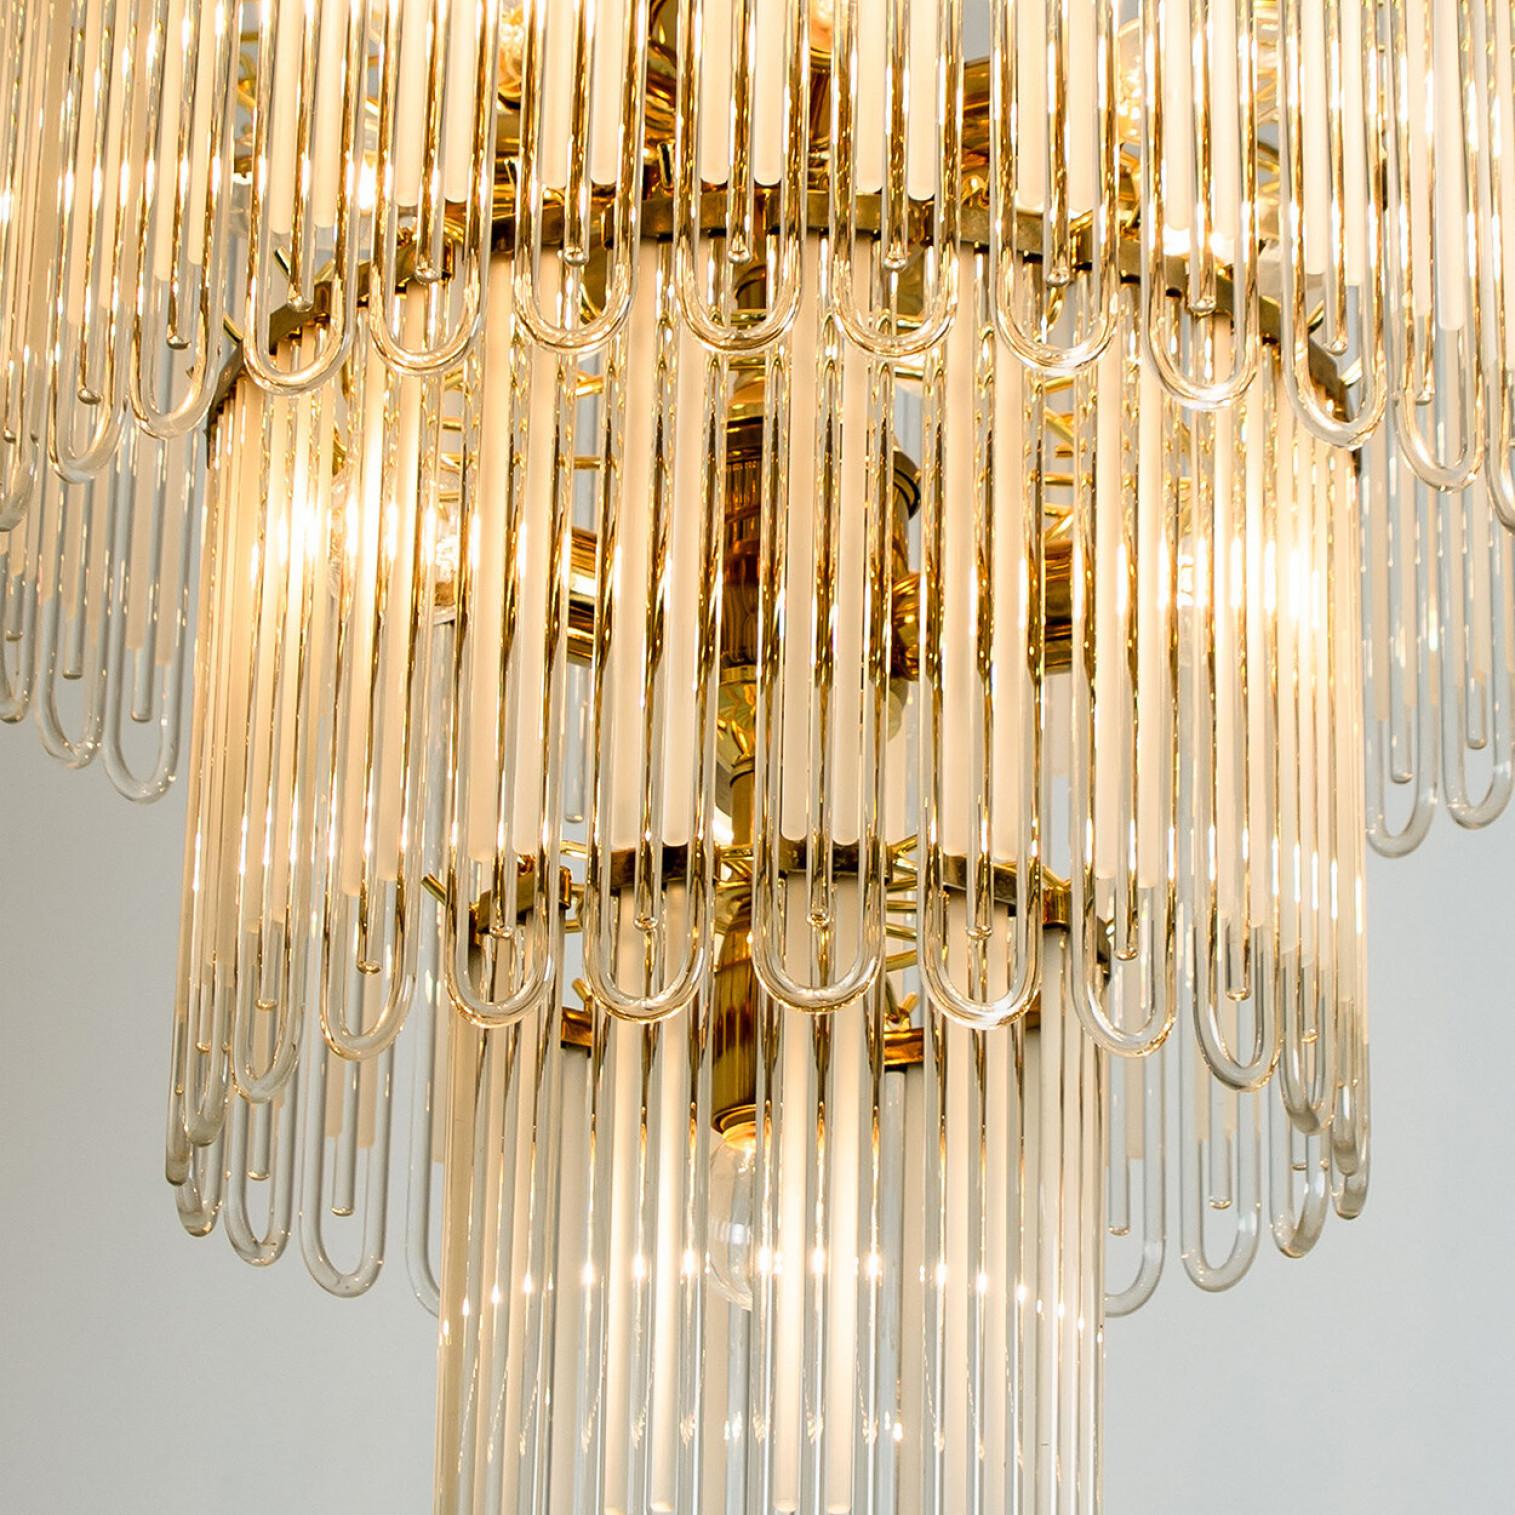 Clean lines to complement all decors. Wonderful high-end light fixture by Sciolari. With brass detail hanging glass giving the piece an elegant appearance which refracts the light, filling a room with a soft, warm glow

The chandelier has brass